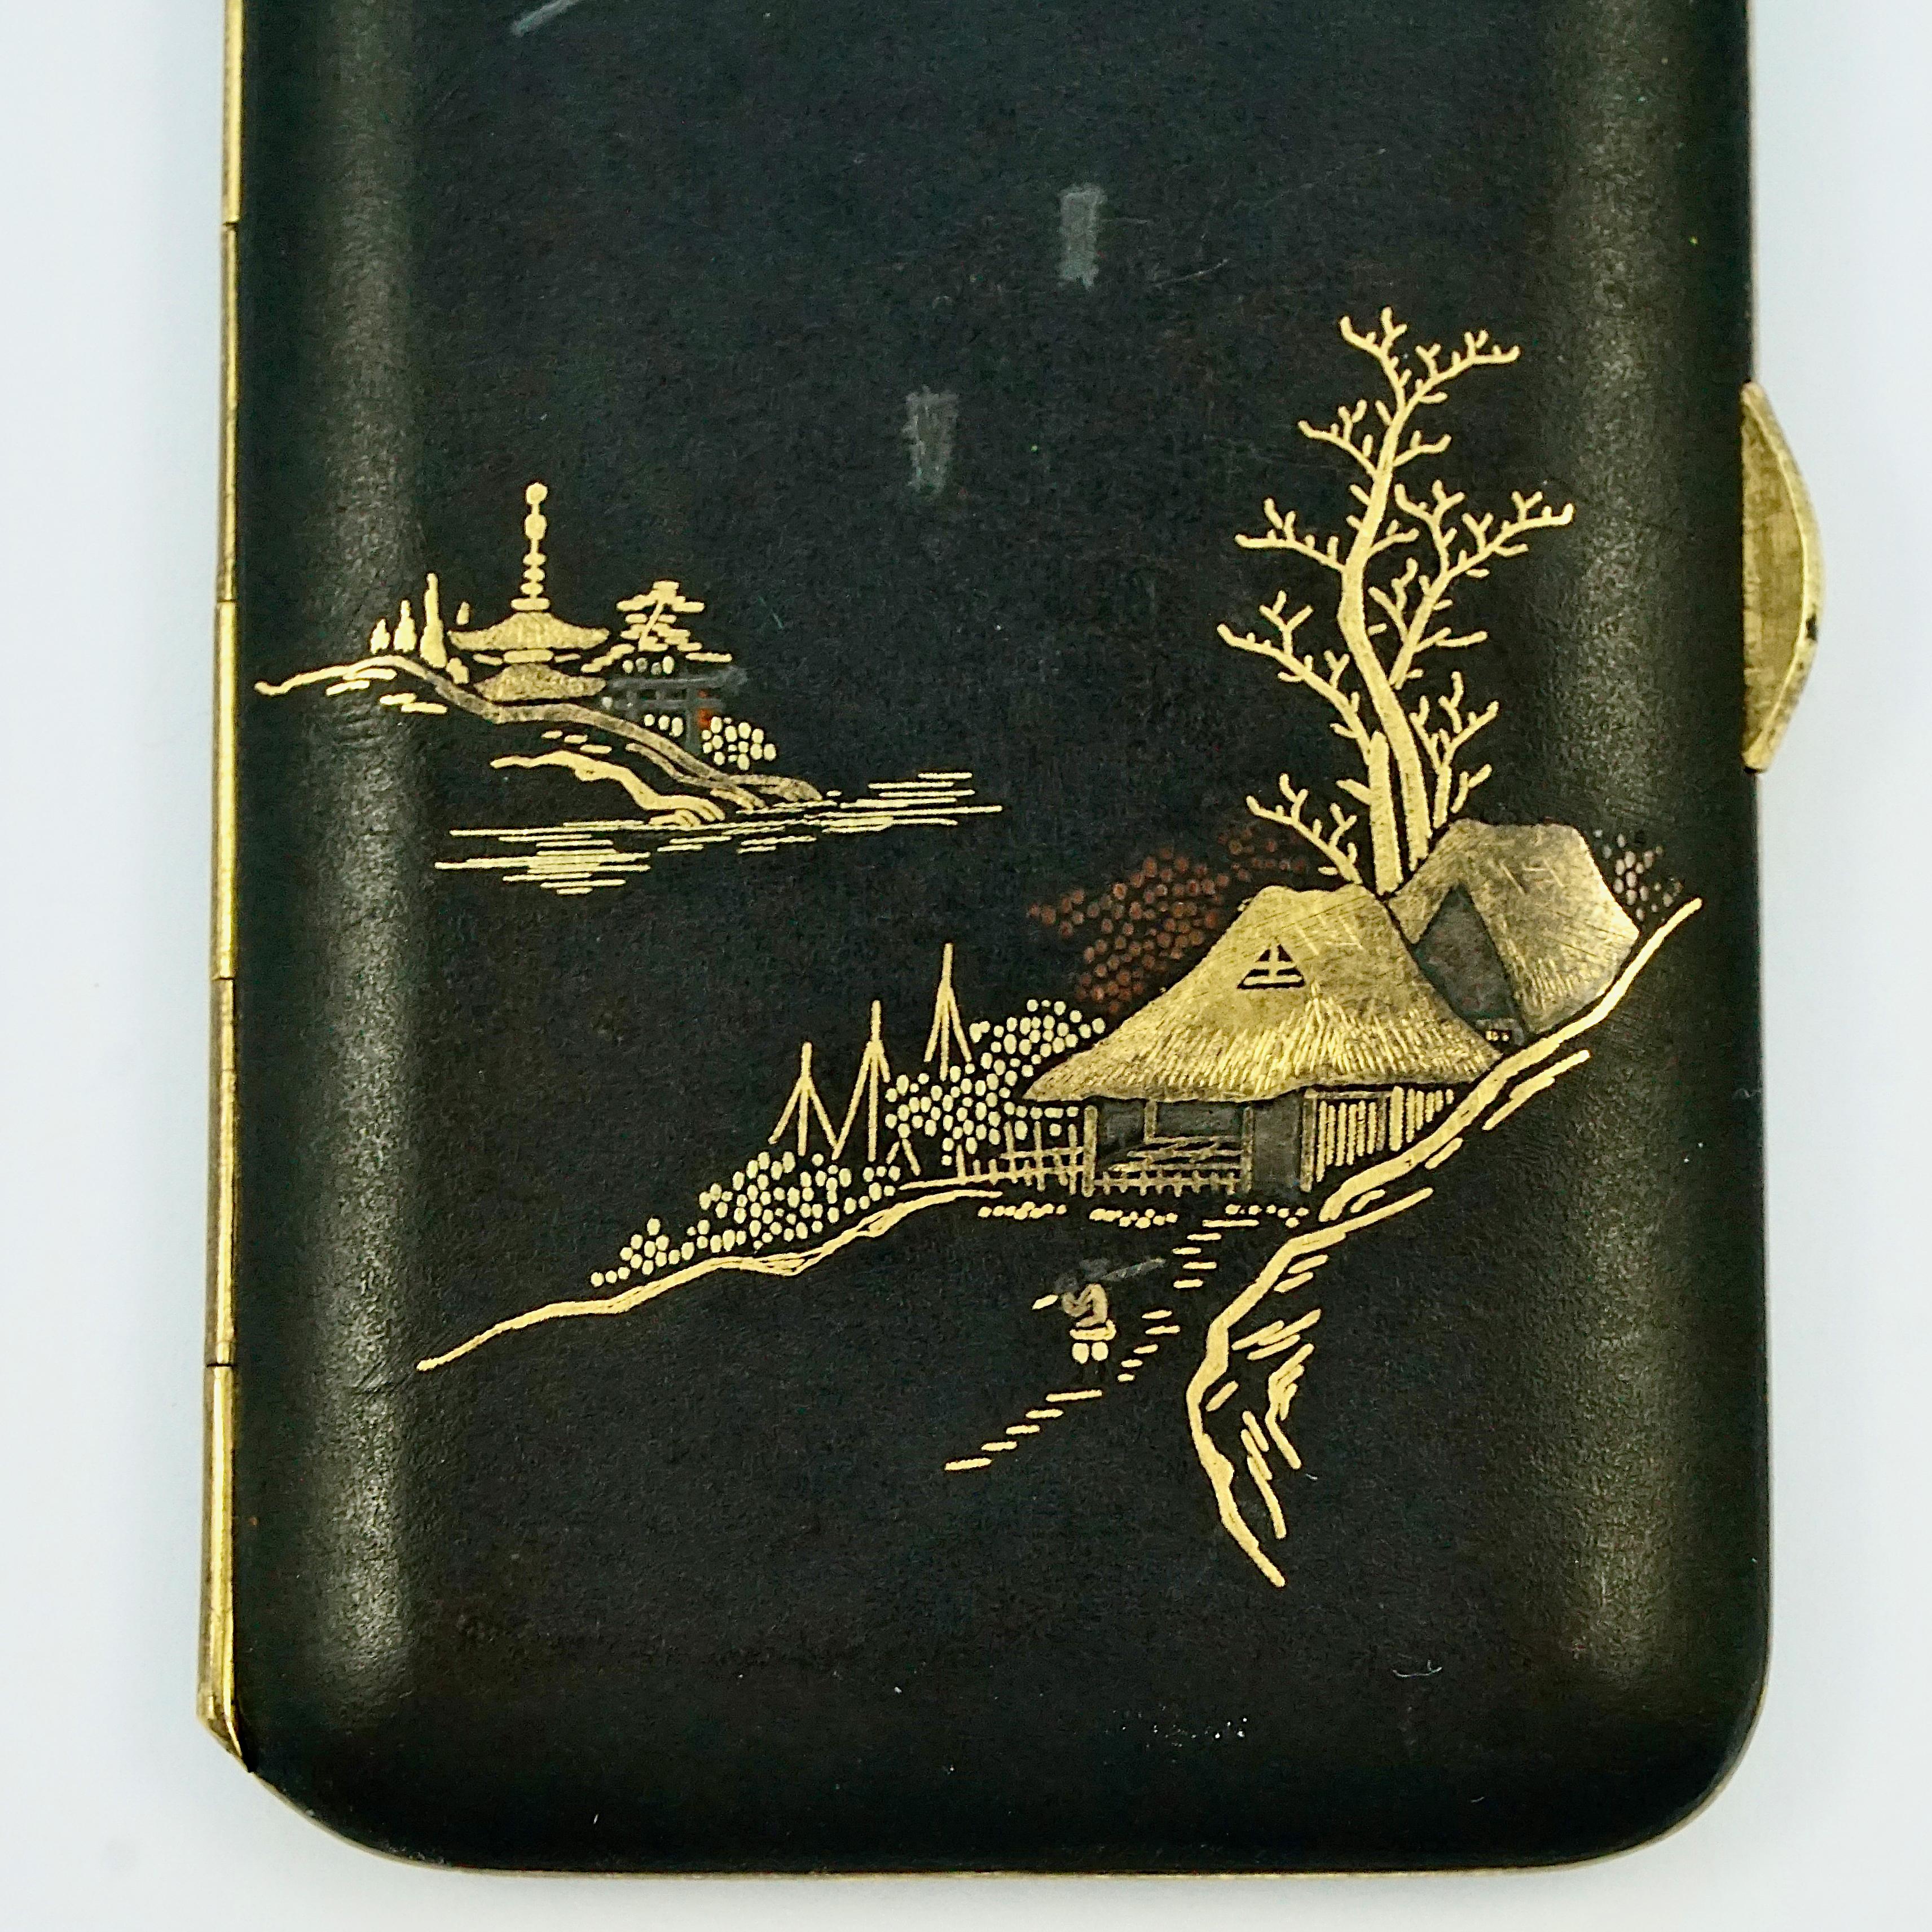 Exquisite Japanese damascene cigarette case with a Mount Fuji landscape, featuring 24K gold and silver decoration on a black background. Measuring length 8.7 cm / 3.4 inches by width 5.25 cm / 2 inches. We believe it is the artists signature on the